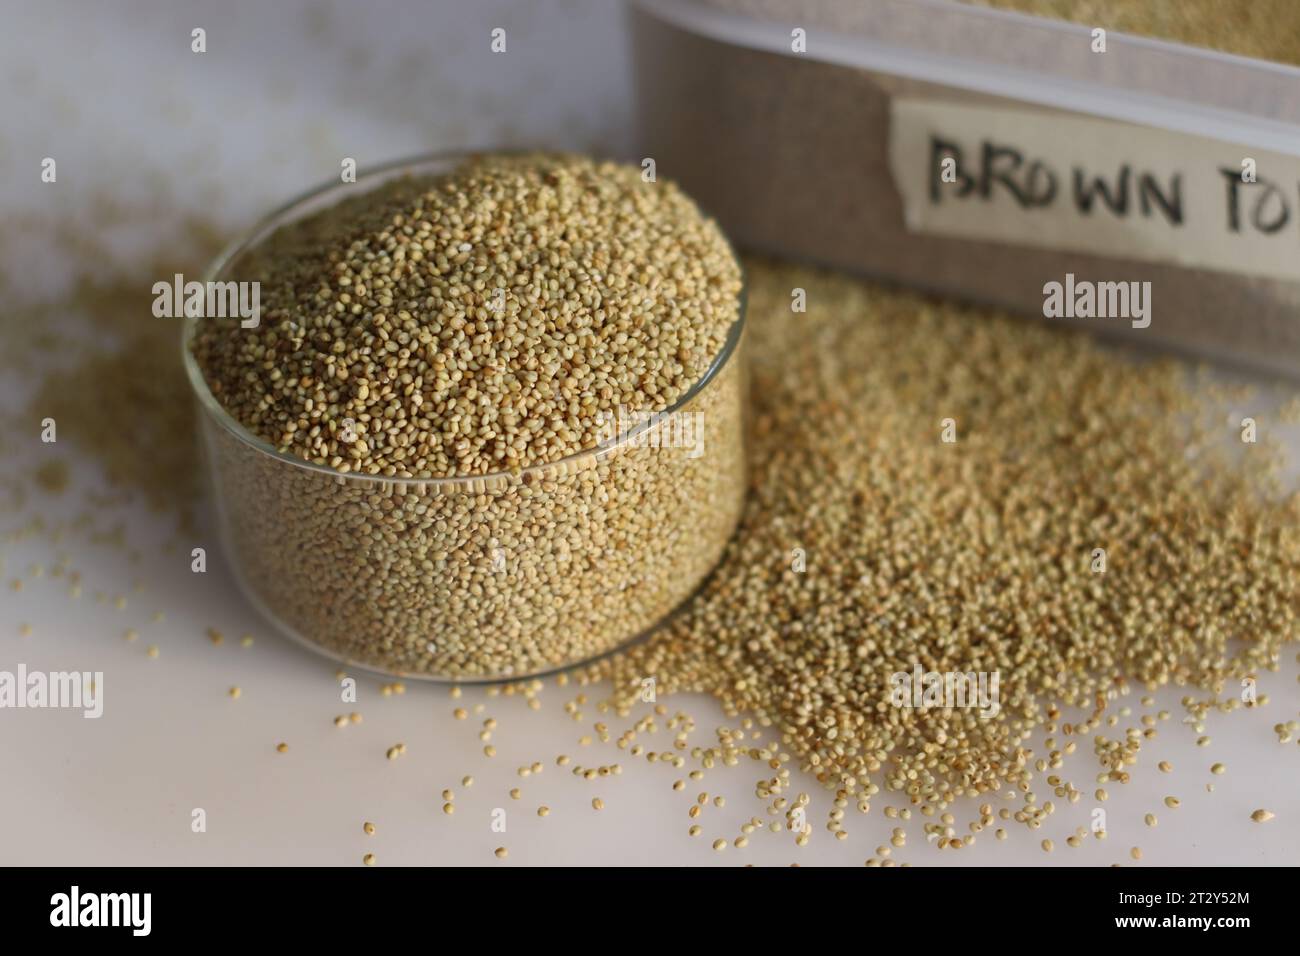 Browntop millet grains kept in a storage container and glass bowl filled to the brim, showcasing its wholesome grains, ideal for illustrating healthy Stock Photo